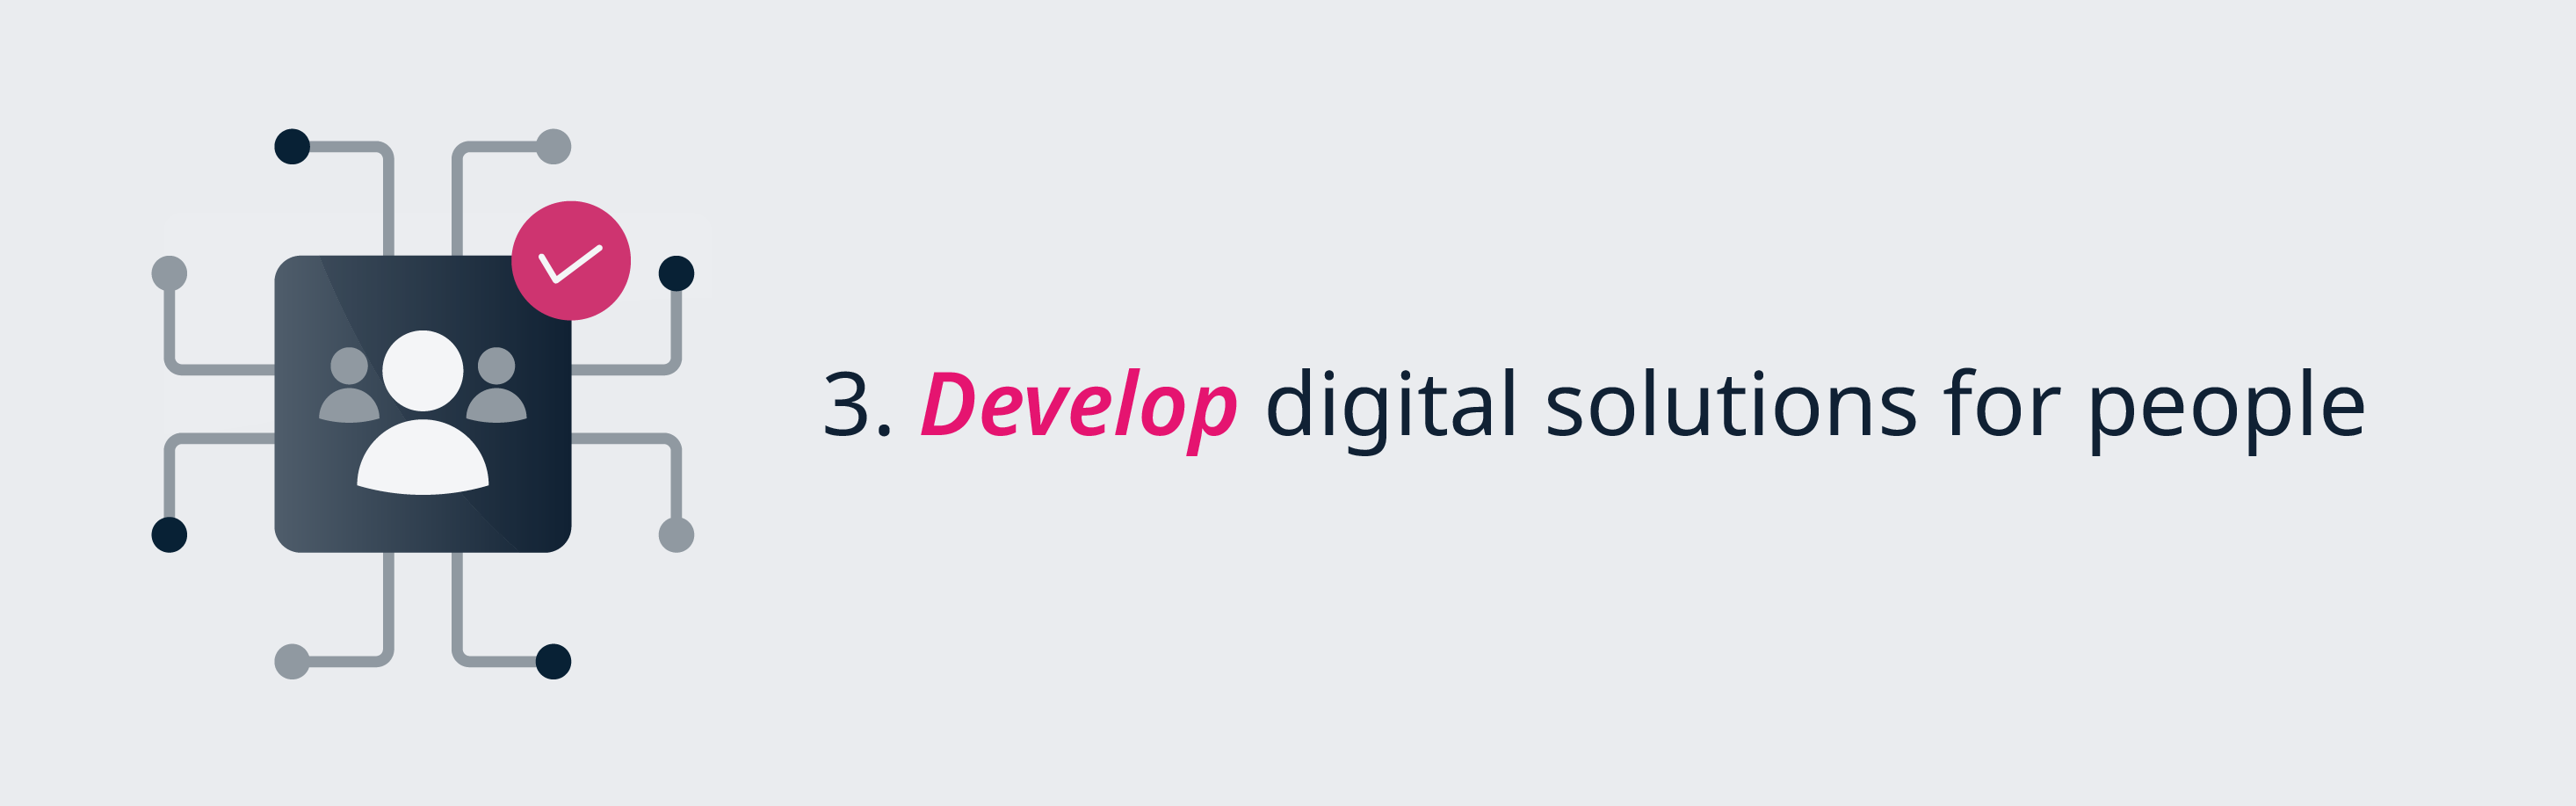 Step 3 towards successful digital transformation: Develop digital solutions for people